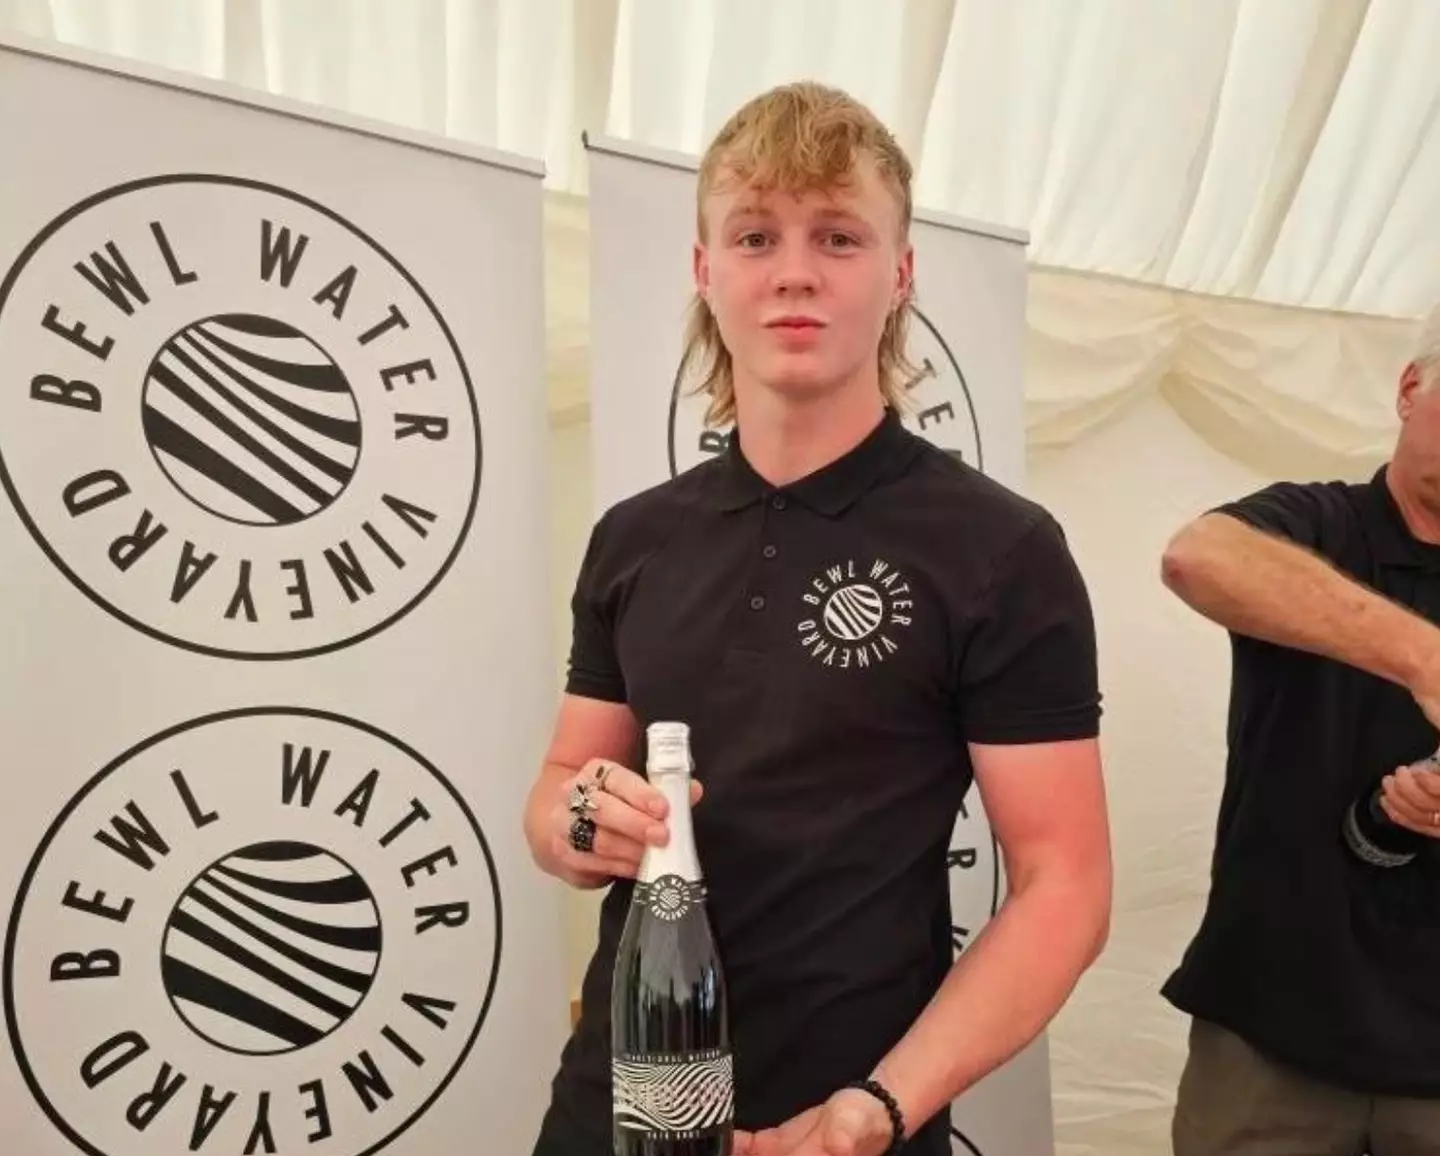 Ashton with a bottle of his award-winning wine.